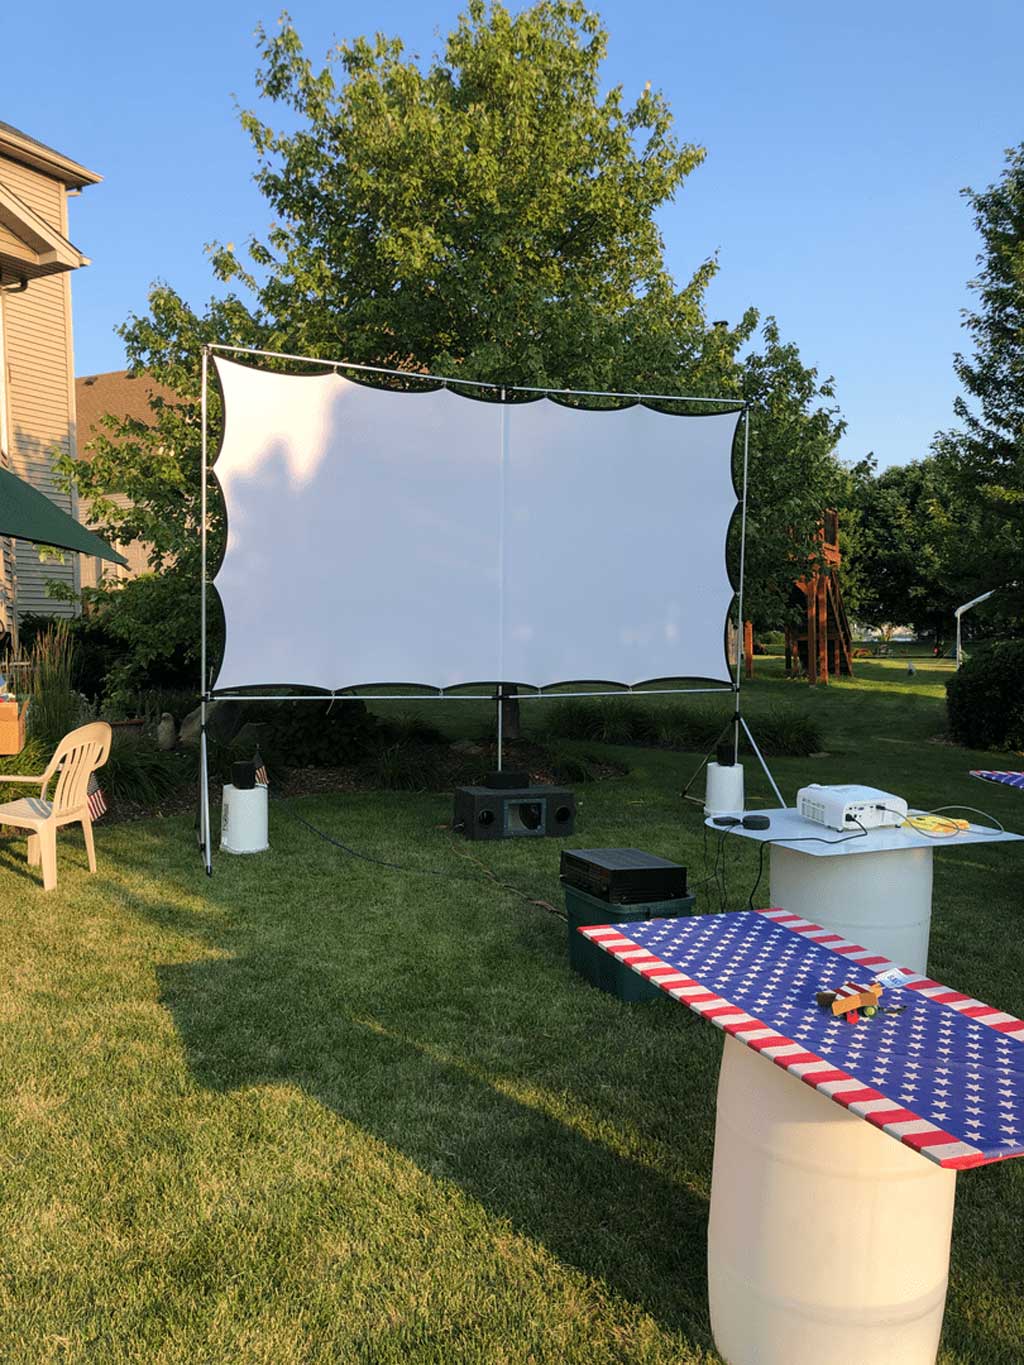 How To Make A DIY Projector Screen Frame